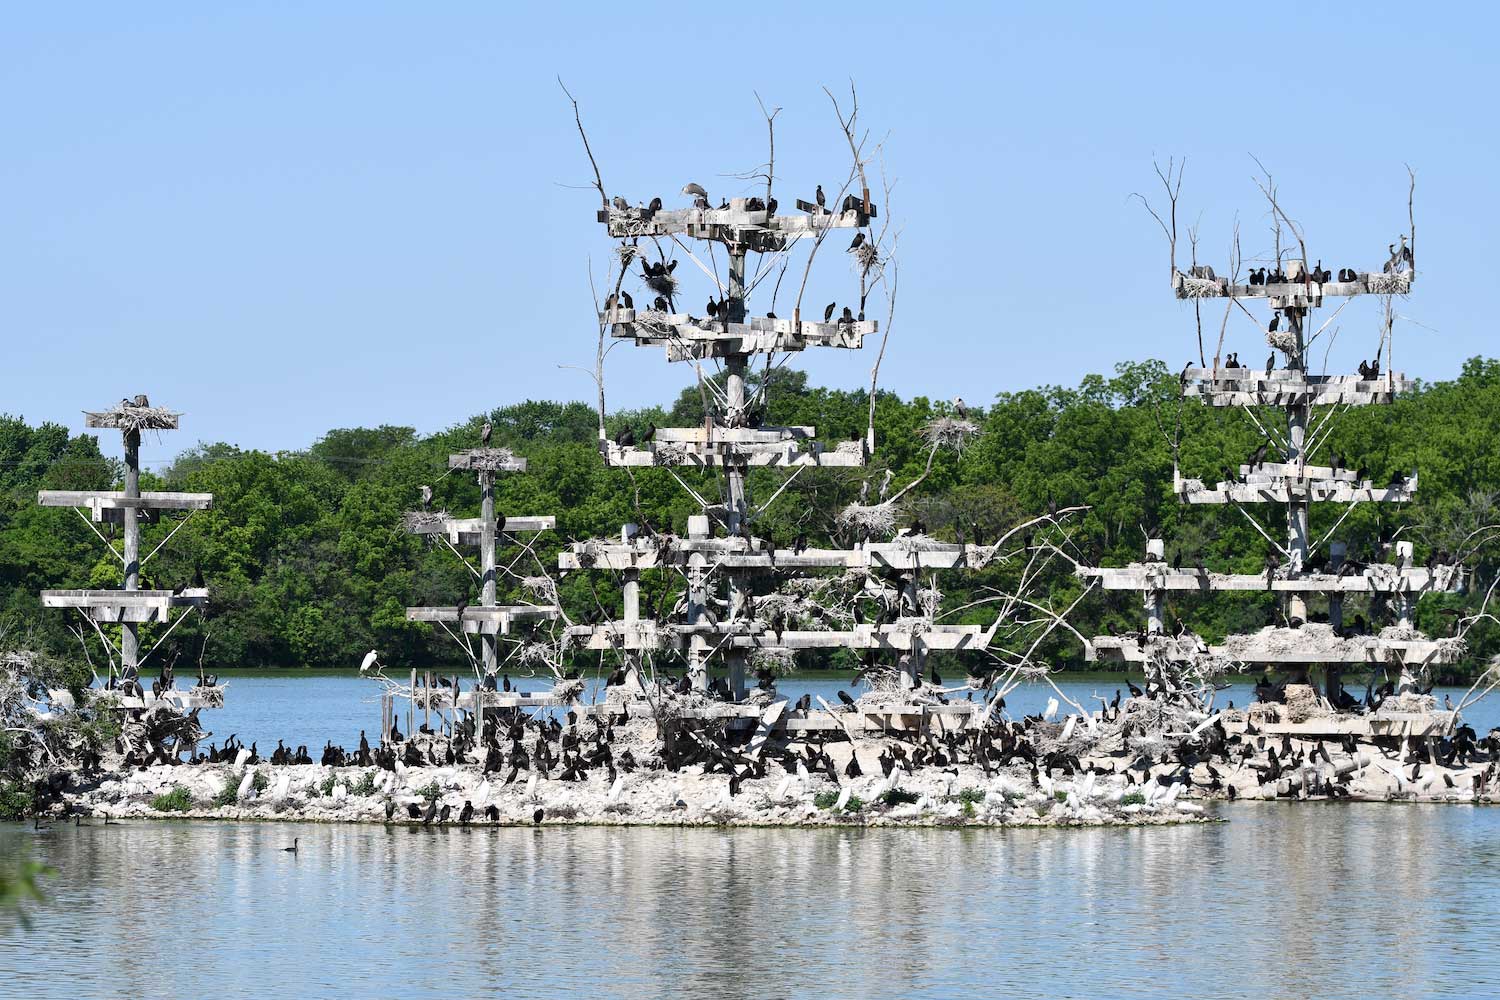 Nesting platforms filled with great blue herons, great egrets and double-crested cormorants.